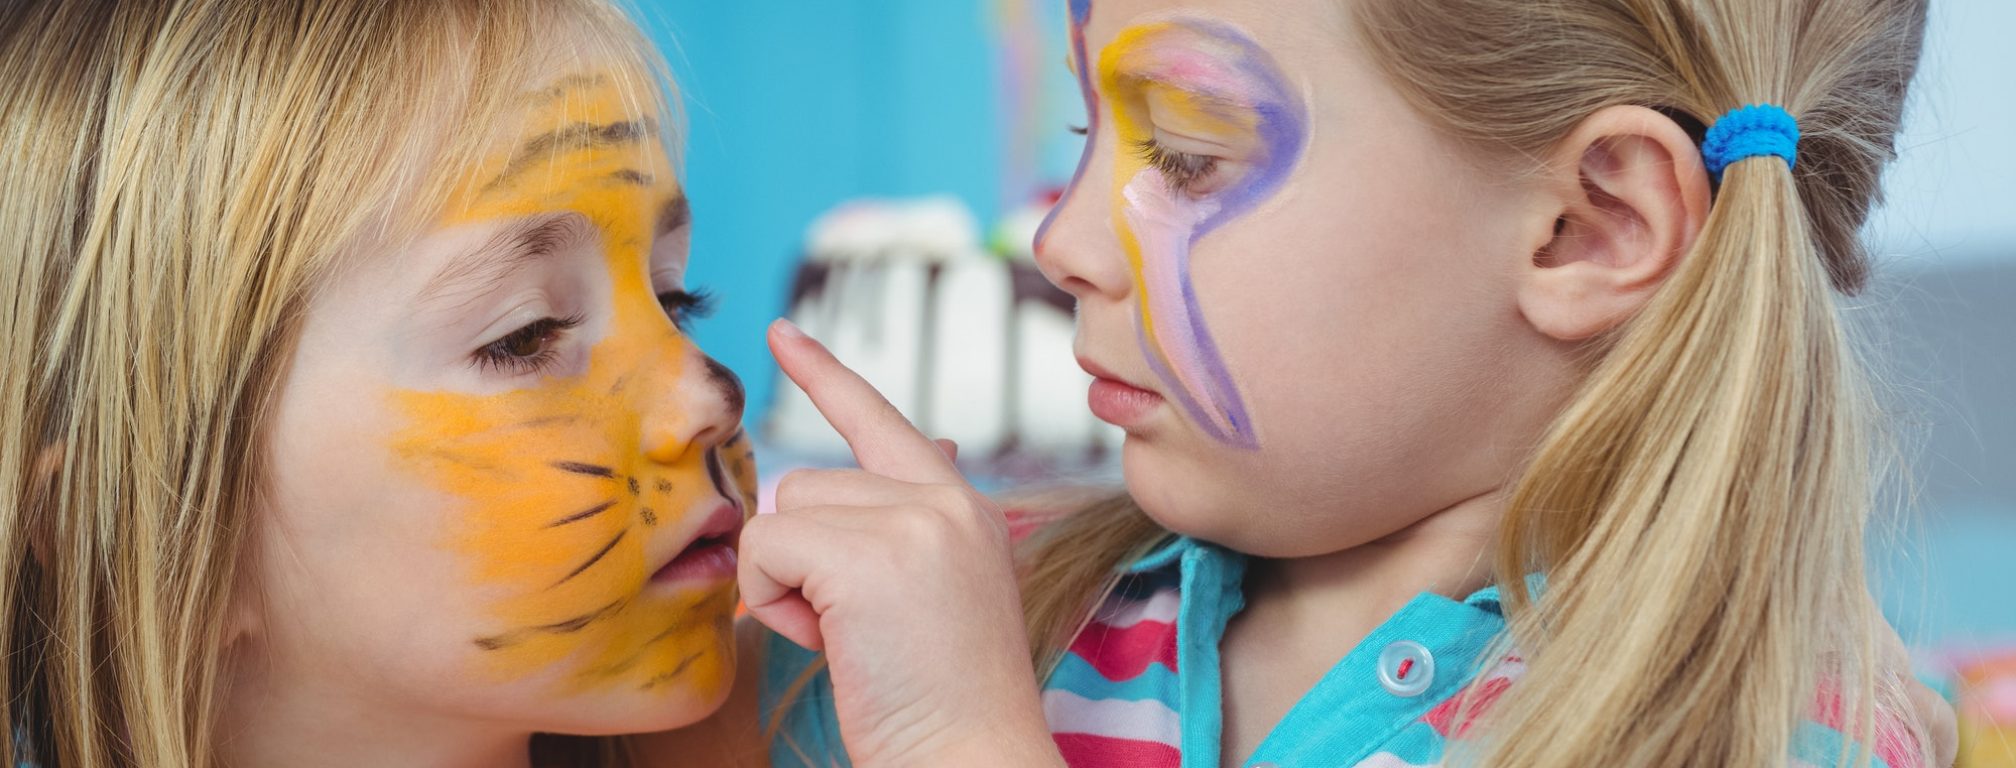 Smiling girls with their faces painted at the birthday party